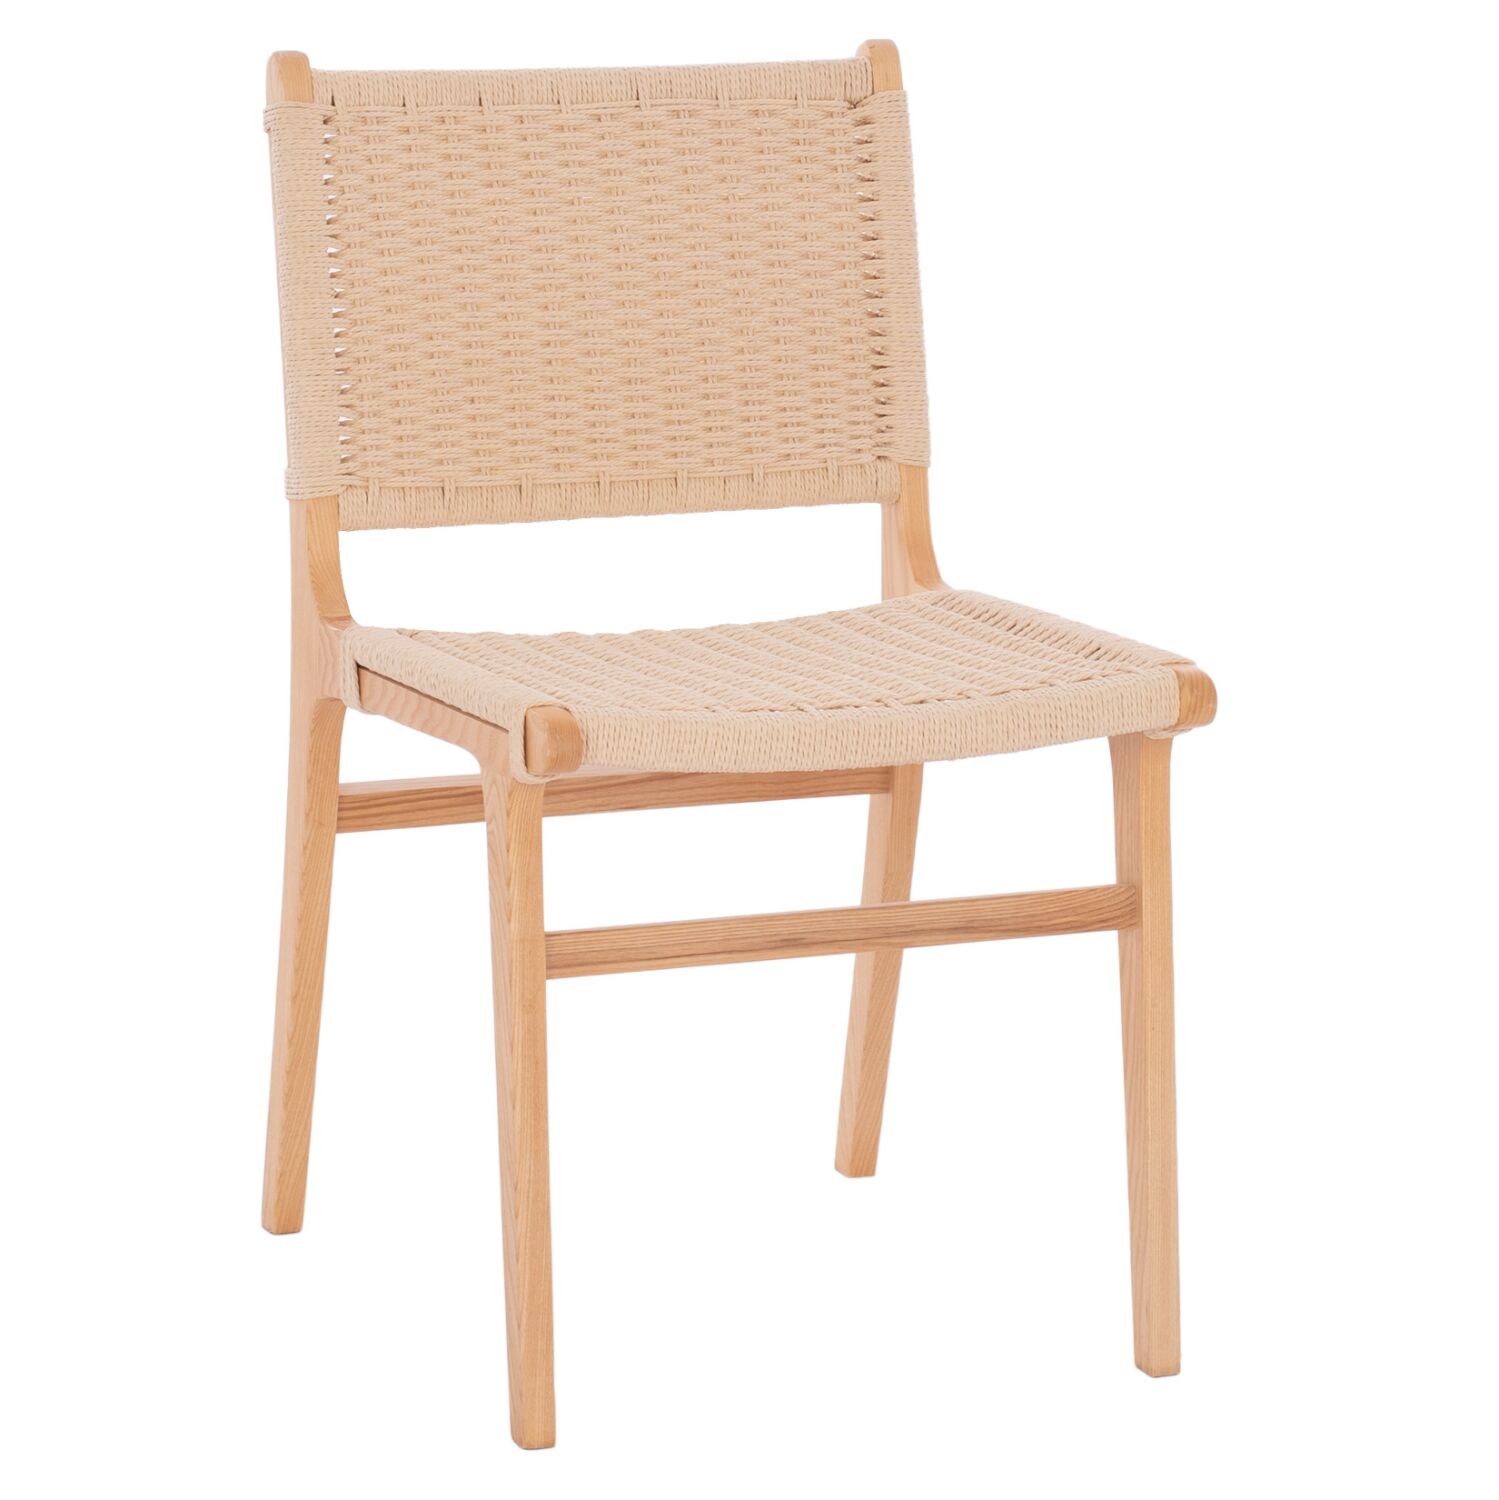 CHAIR HM9330.01 IGNACIO RUBBERWOOD KNITTED NATURAL ROPE 50X60X87H